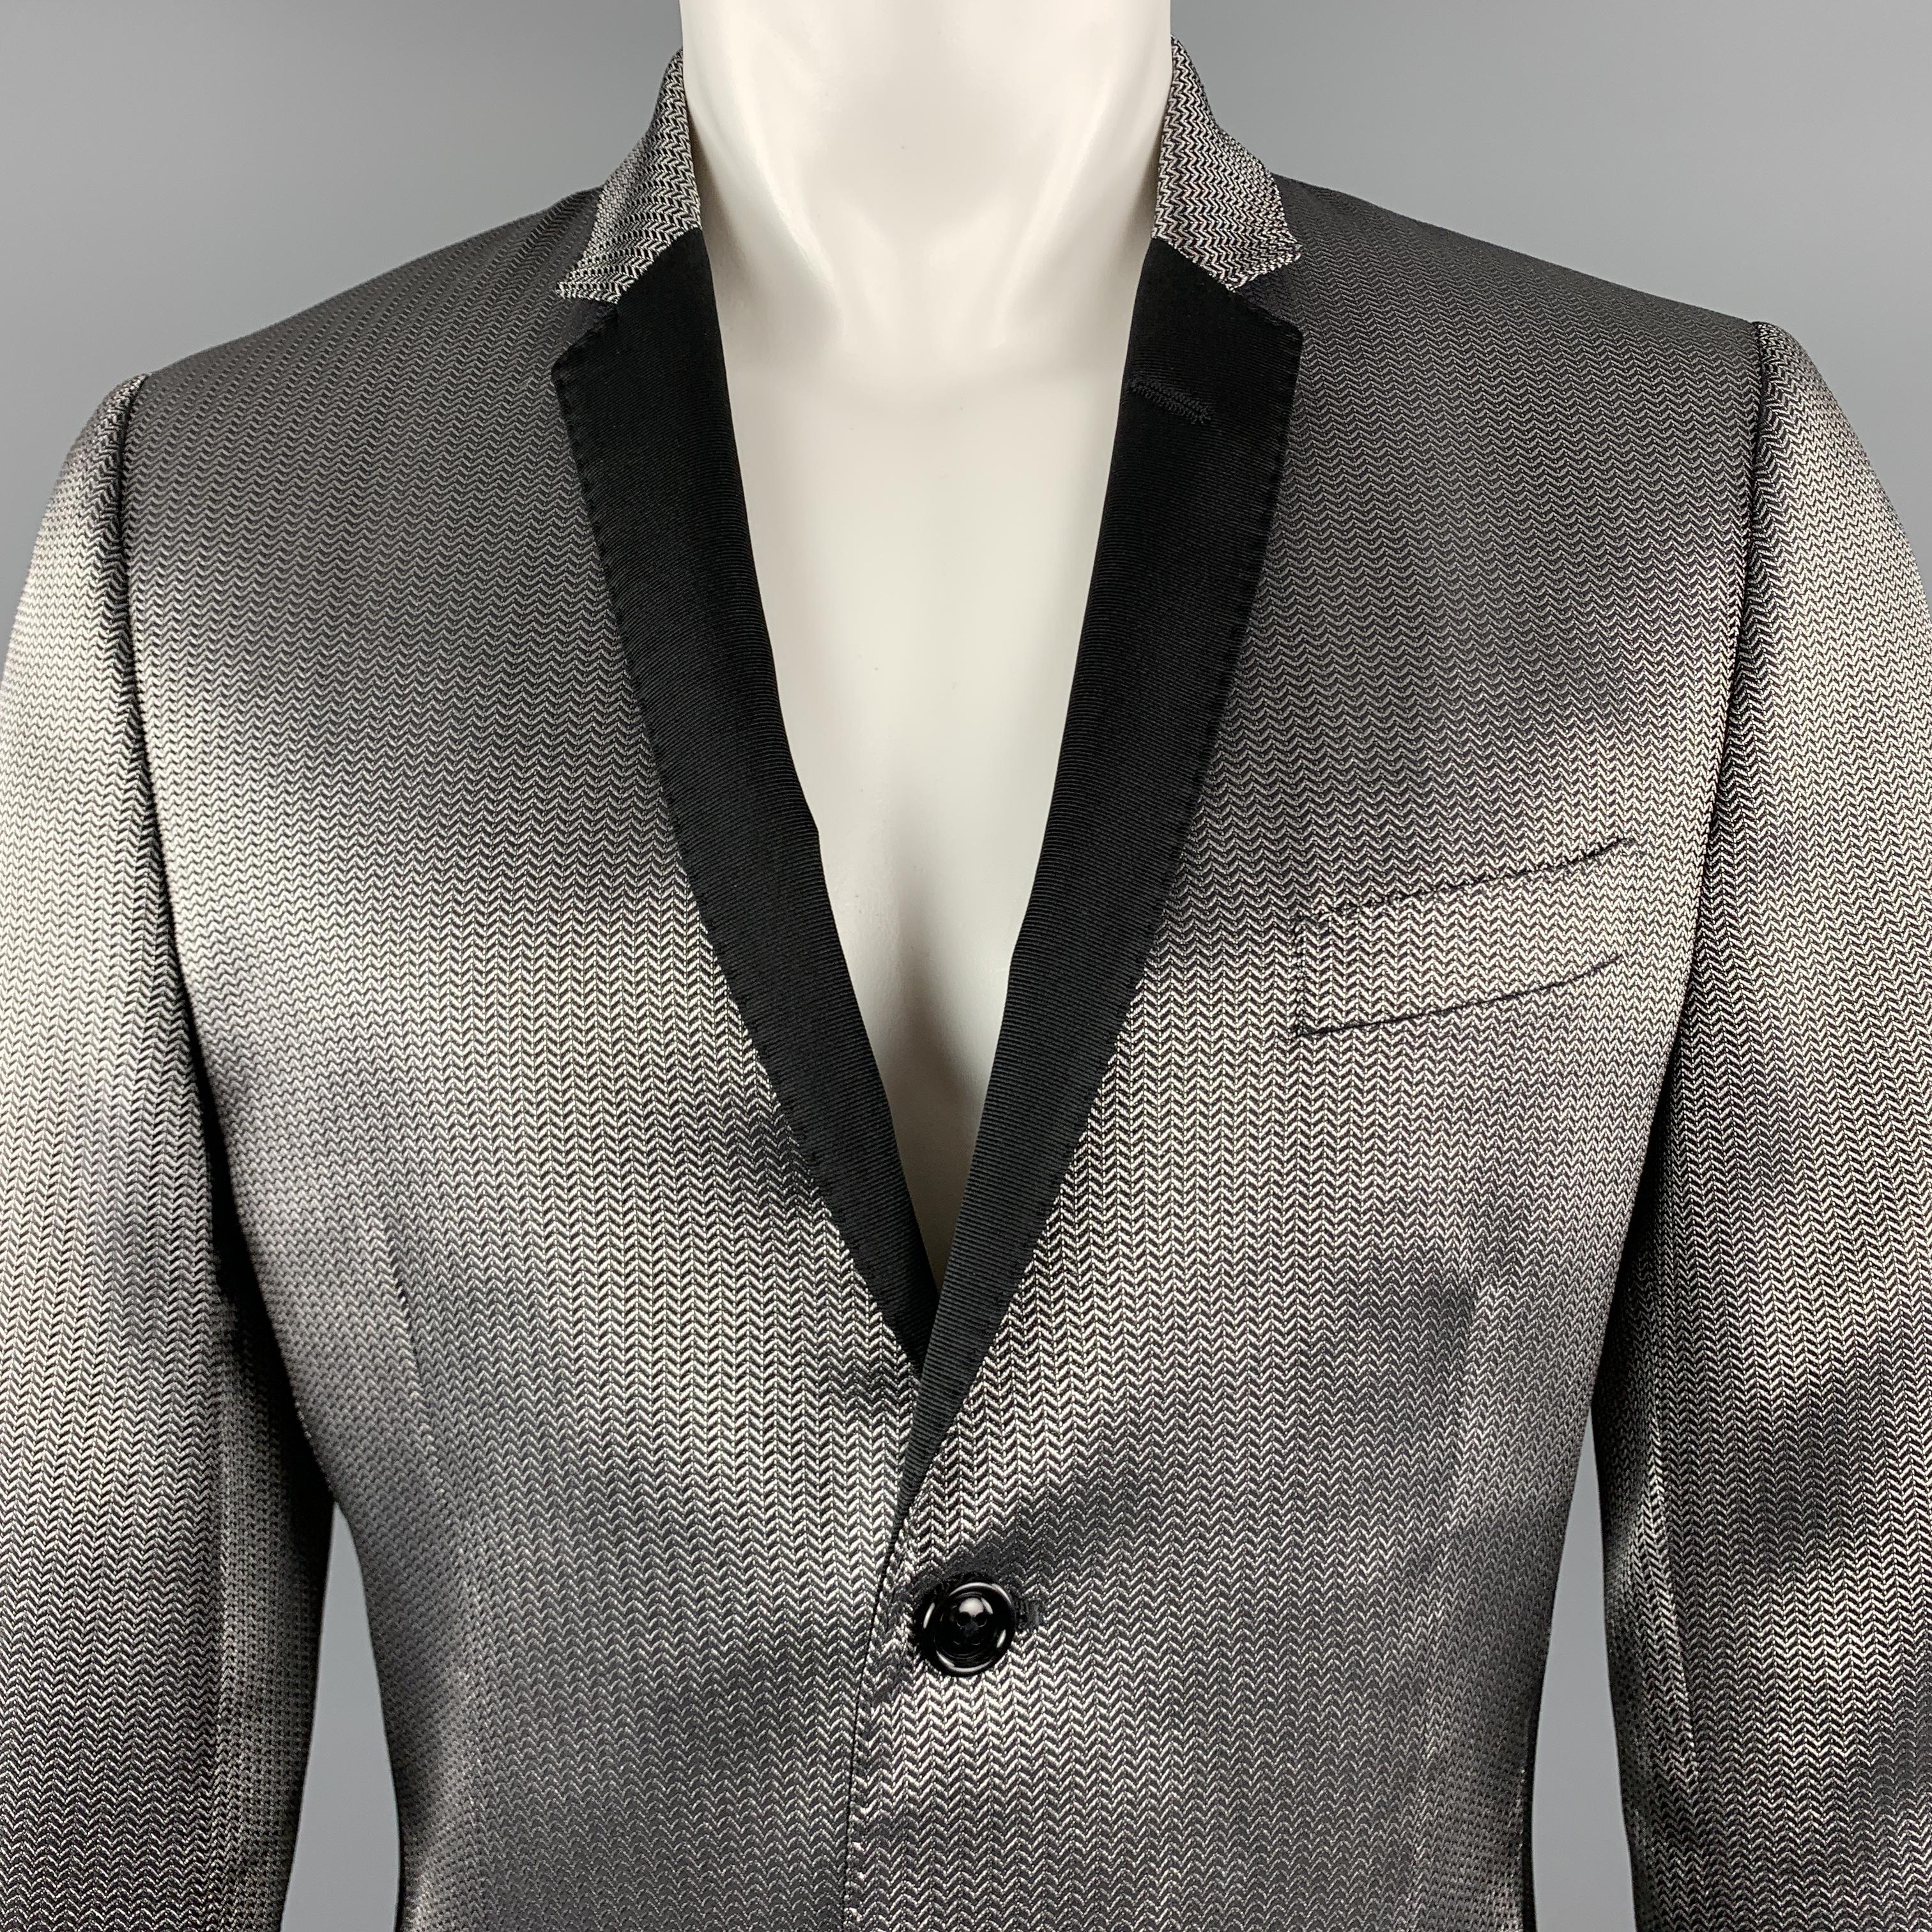 DOLCE & GABBANA sport coat comes in silver metallic herringbone with a slim black notch lapel, single breasted, three button front, and ventless back. Minor wear on back. As-is. Made in Italy.

Very Good Pre-Owned Condition.
Marked: IT